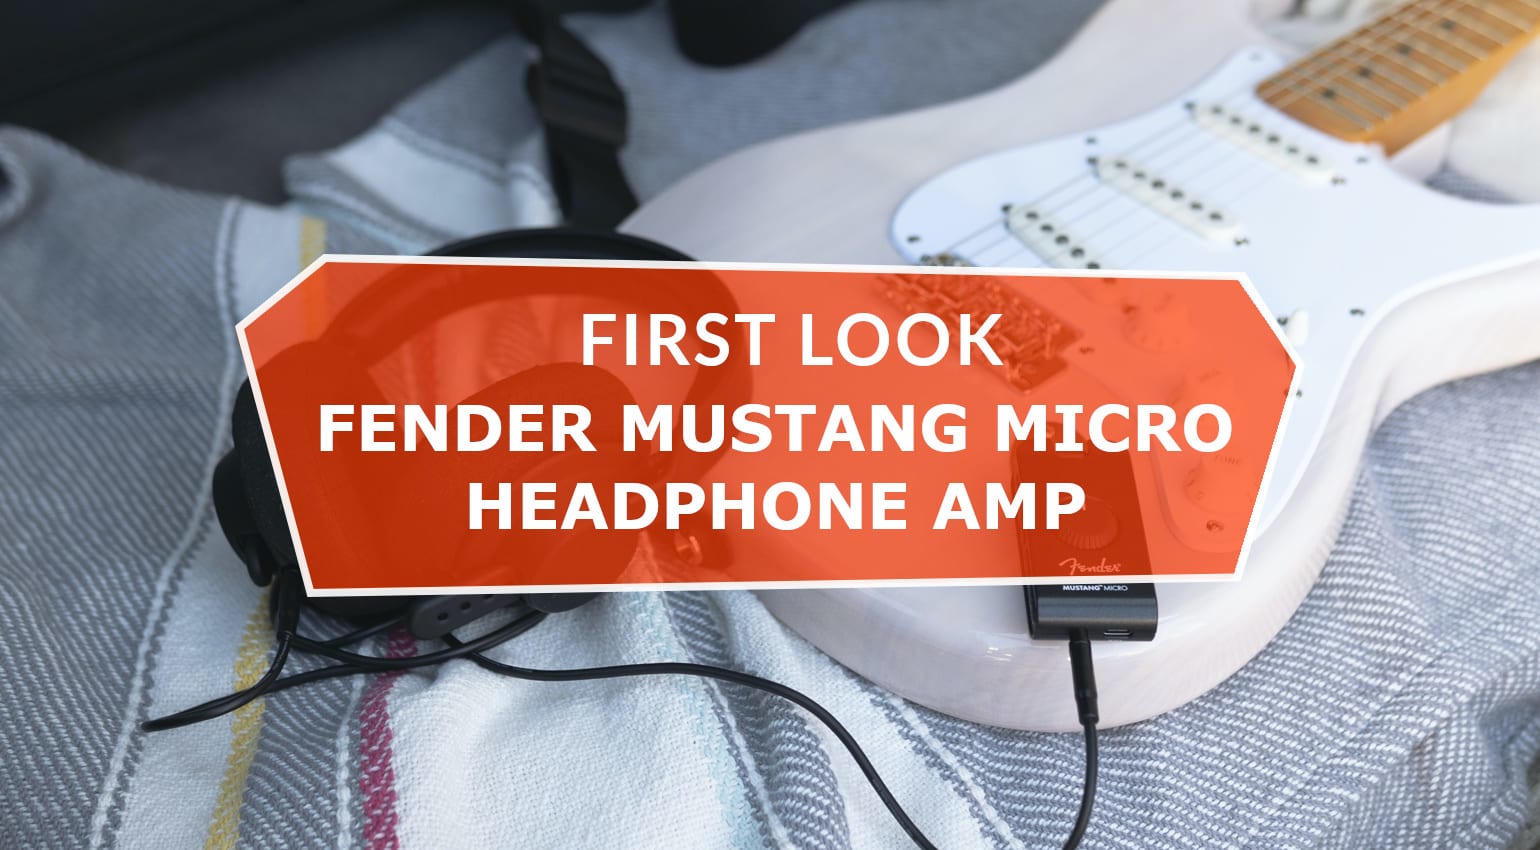 First Look Review: Plug in and go with Fender's Mustang Micro 